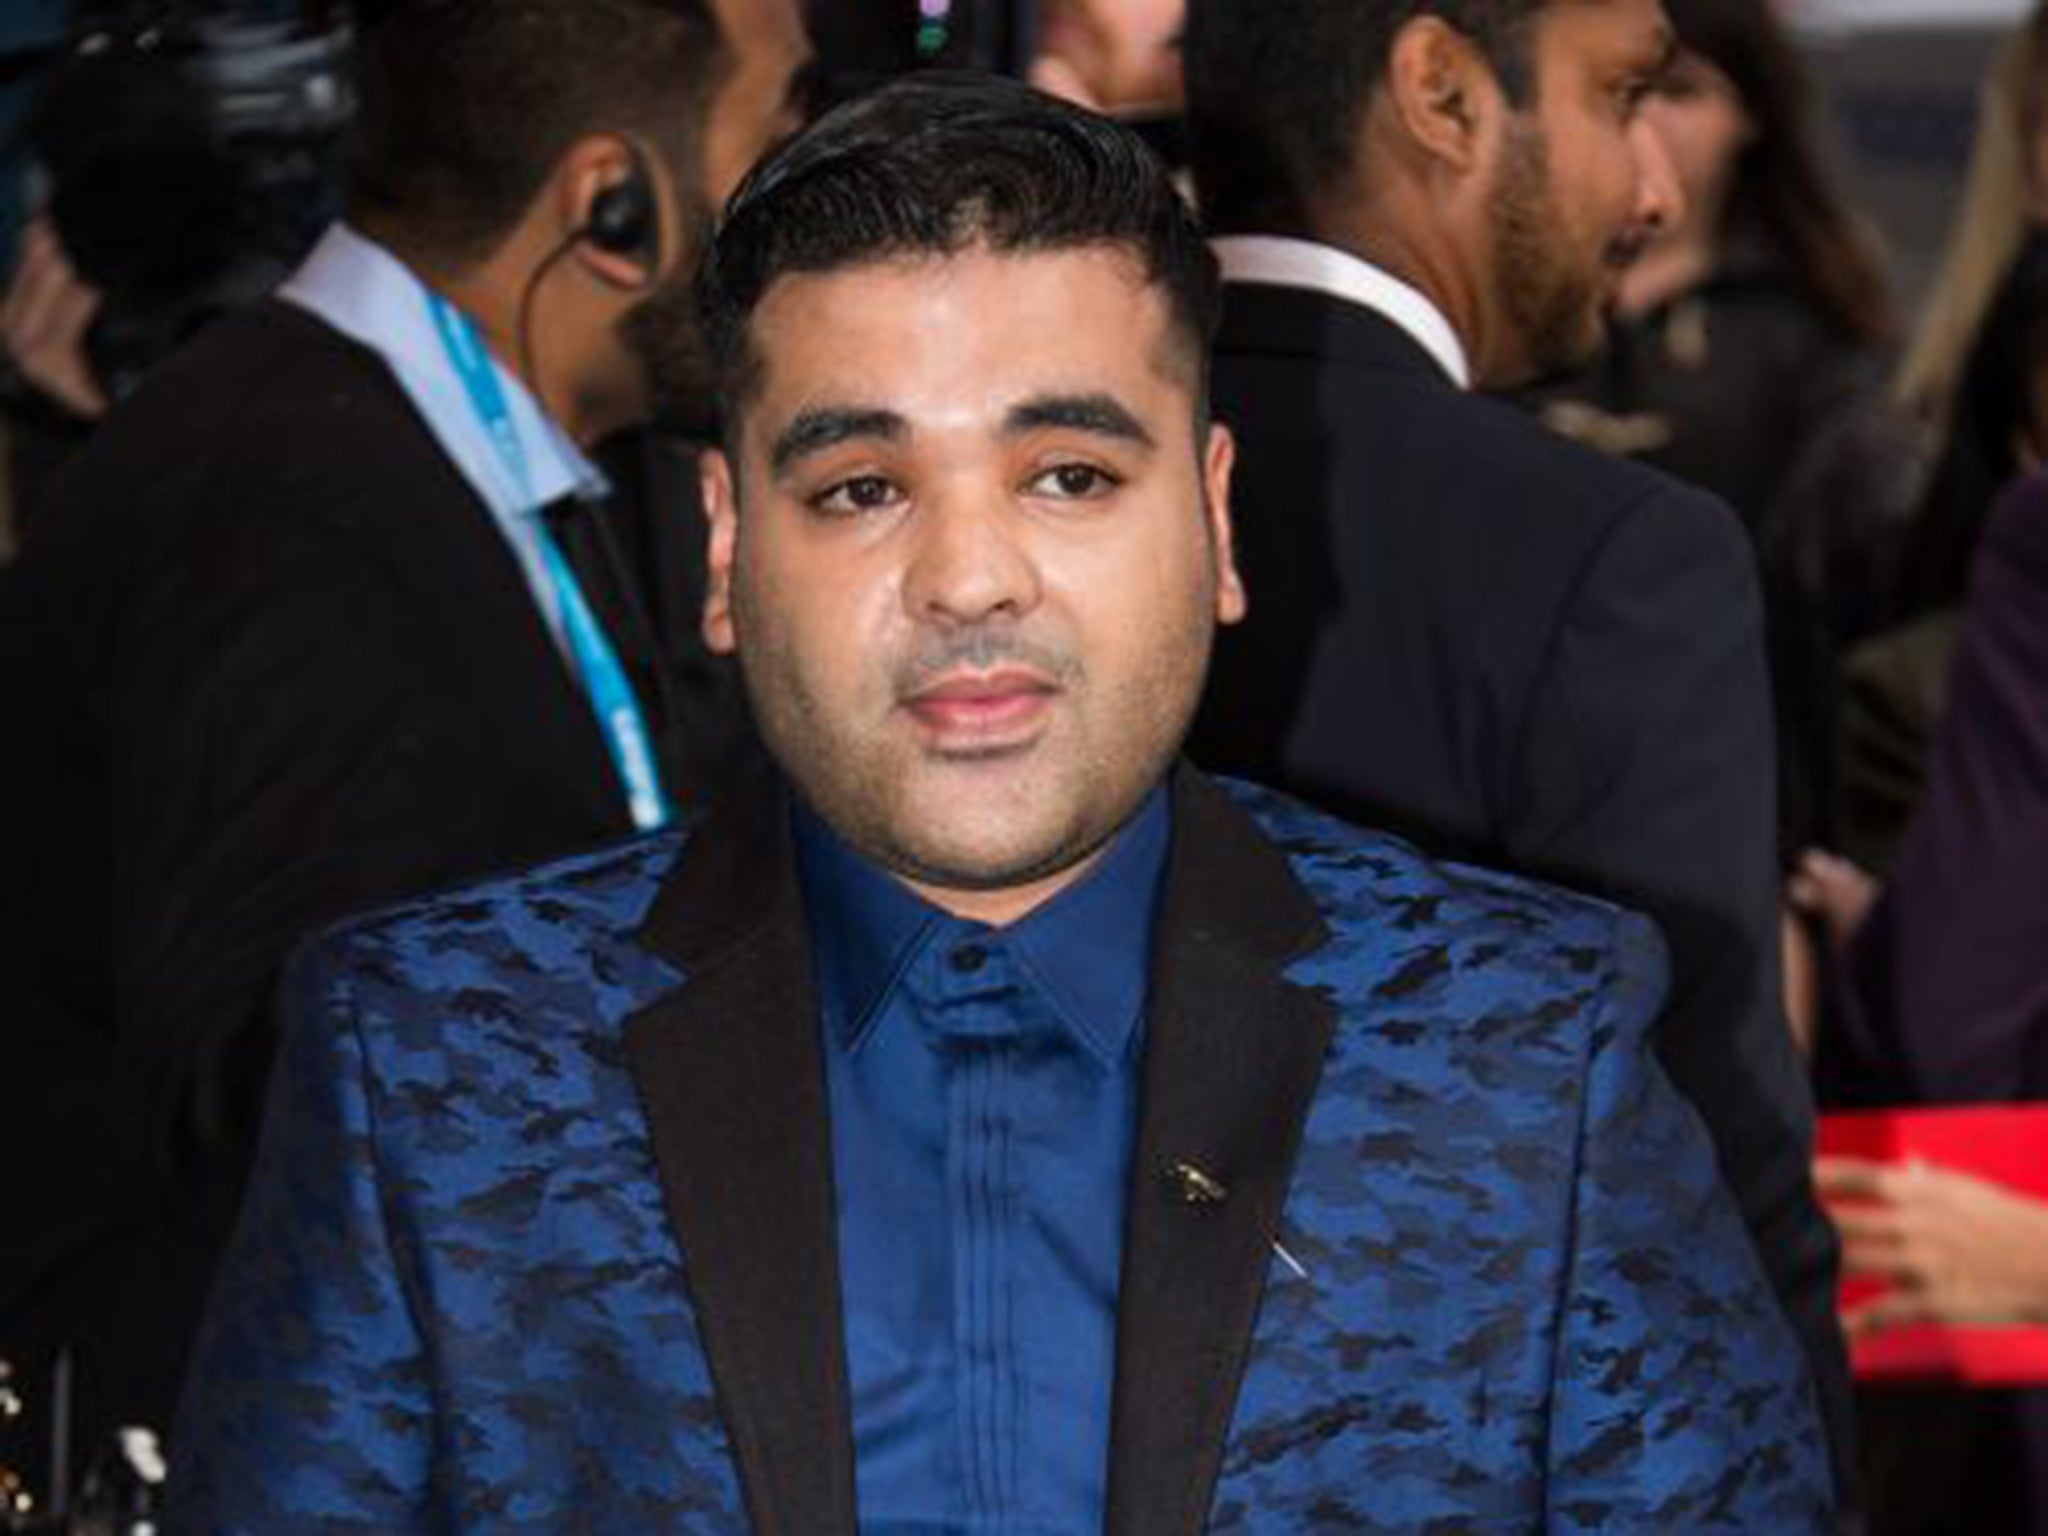 Shahid Khan, better known by his stage name Naughty Boy